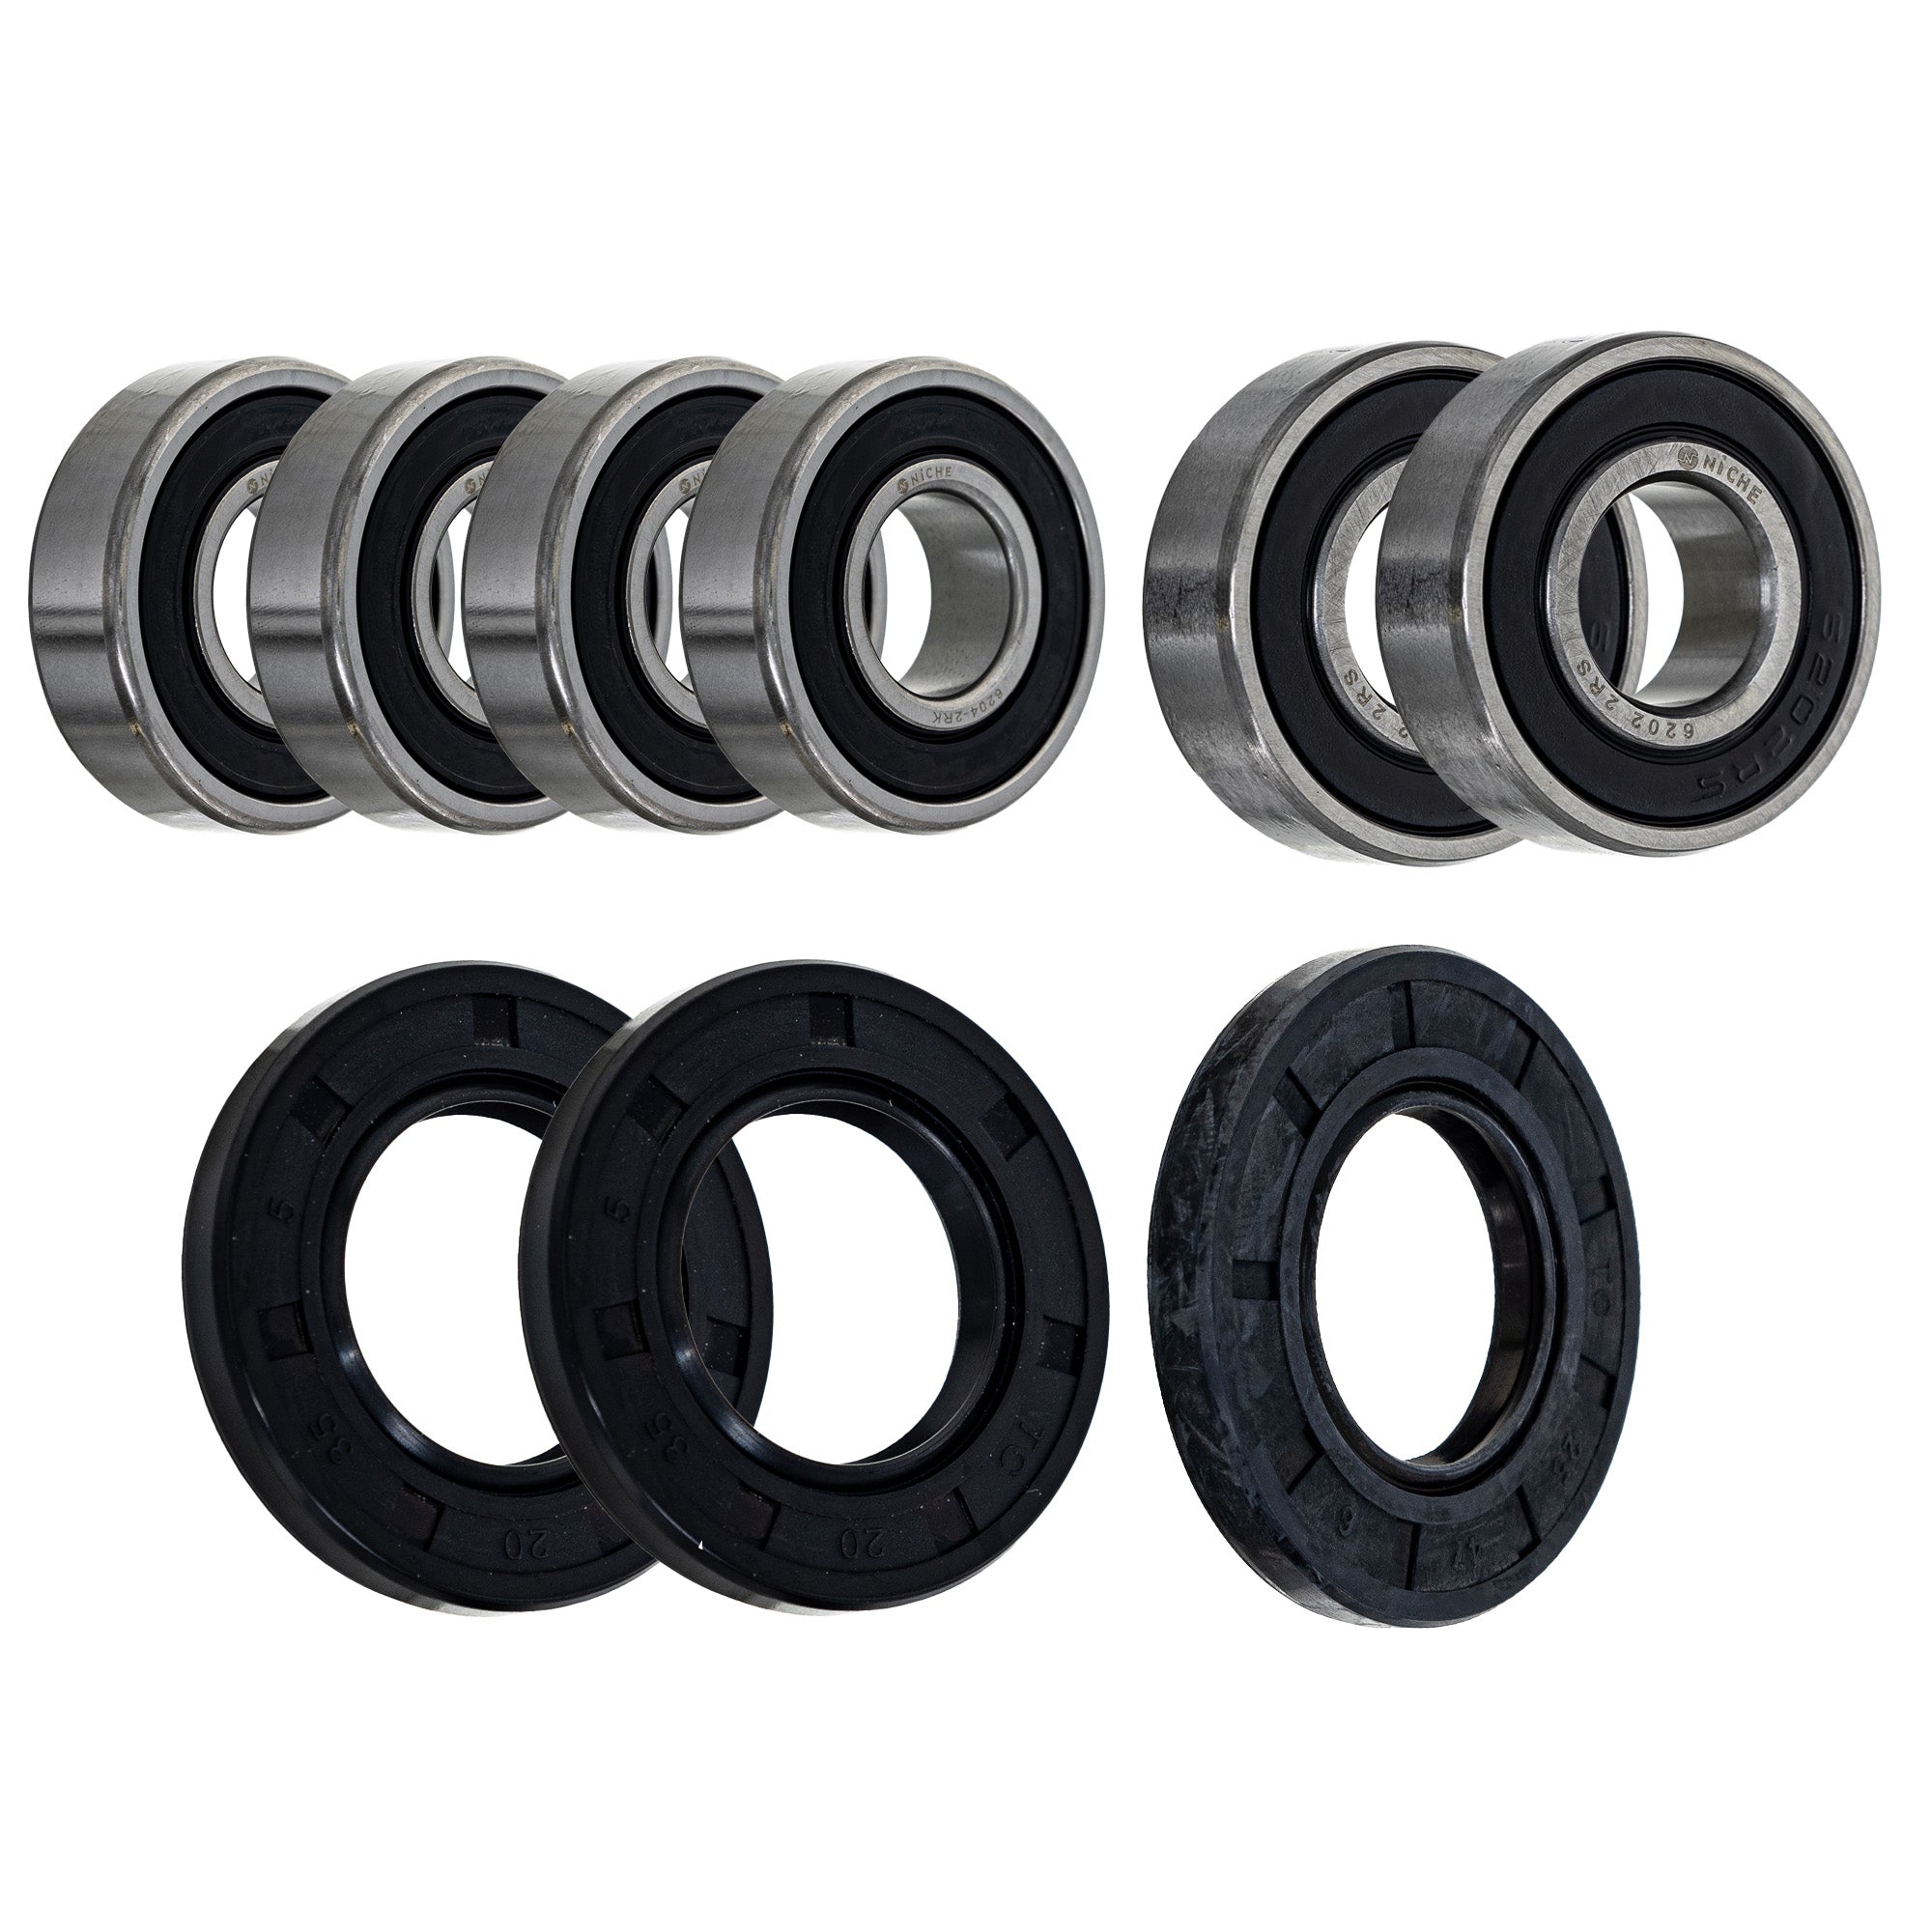 Wheel Bearing Seal Kit for zOTHER Ref No IT200 NICHE MK1008711